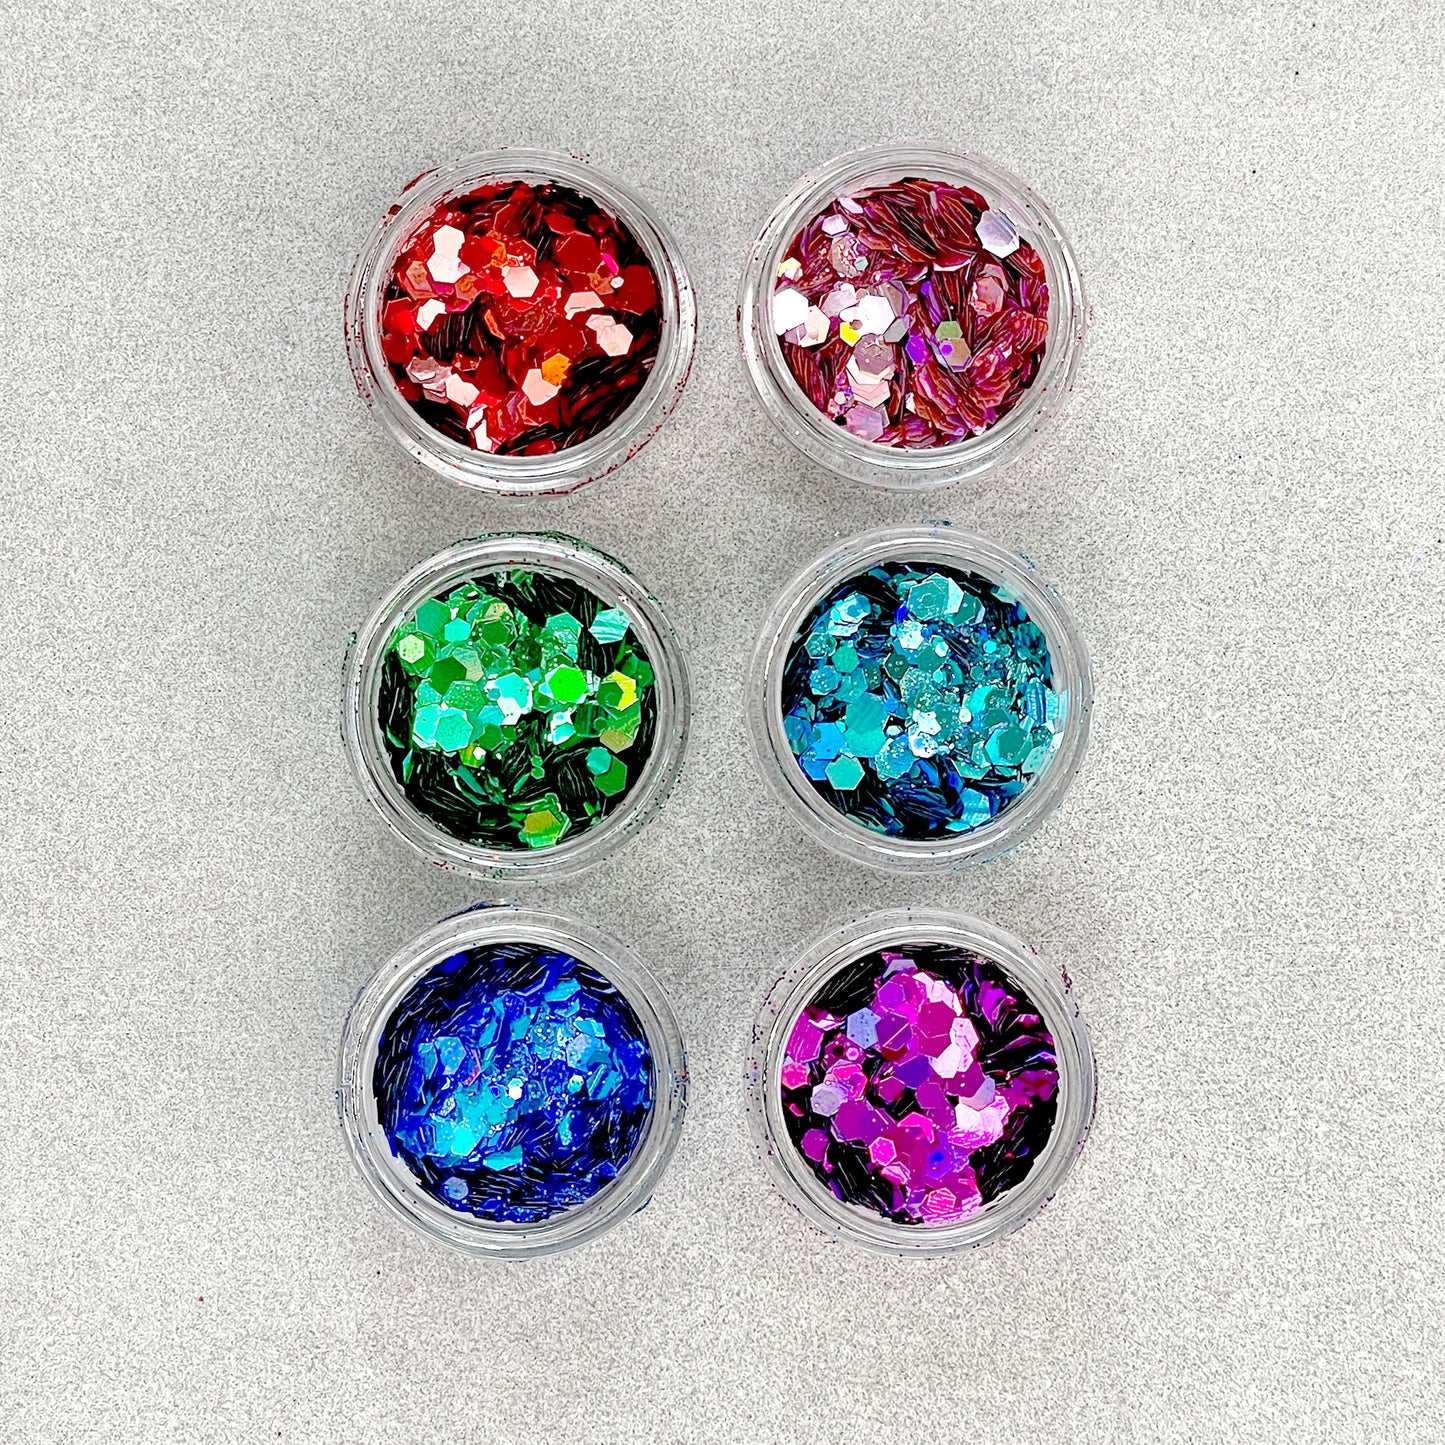 Resin Craft Bright Chunky Glitter Inclusions